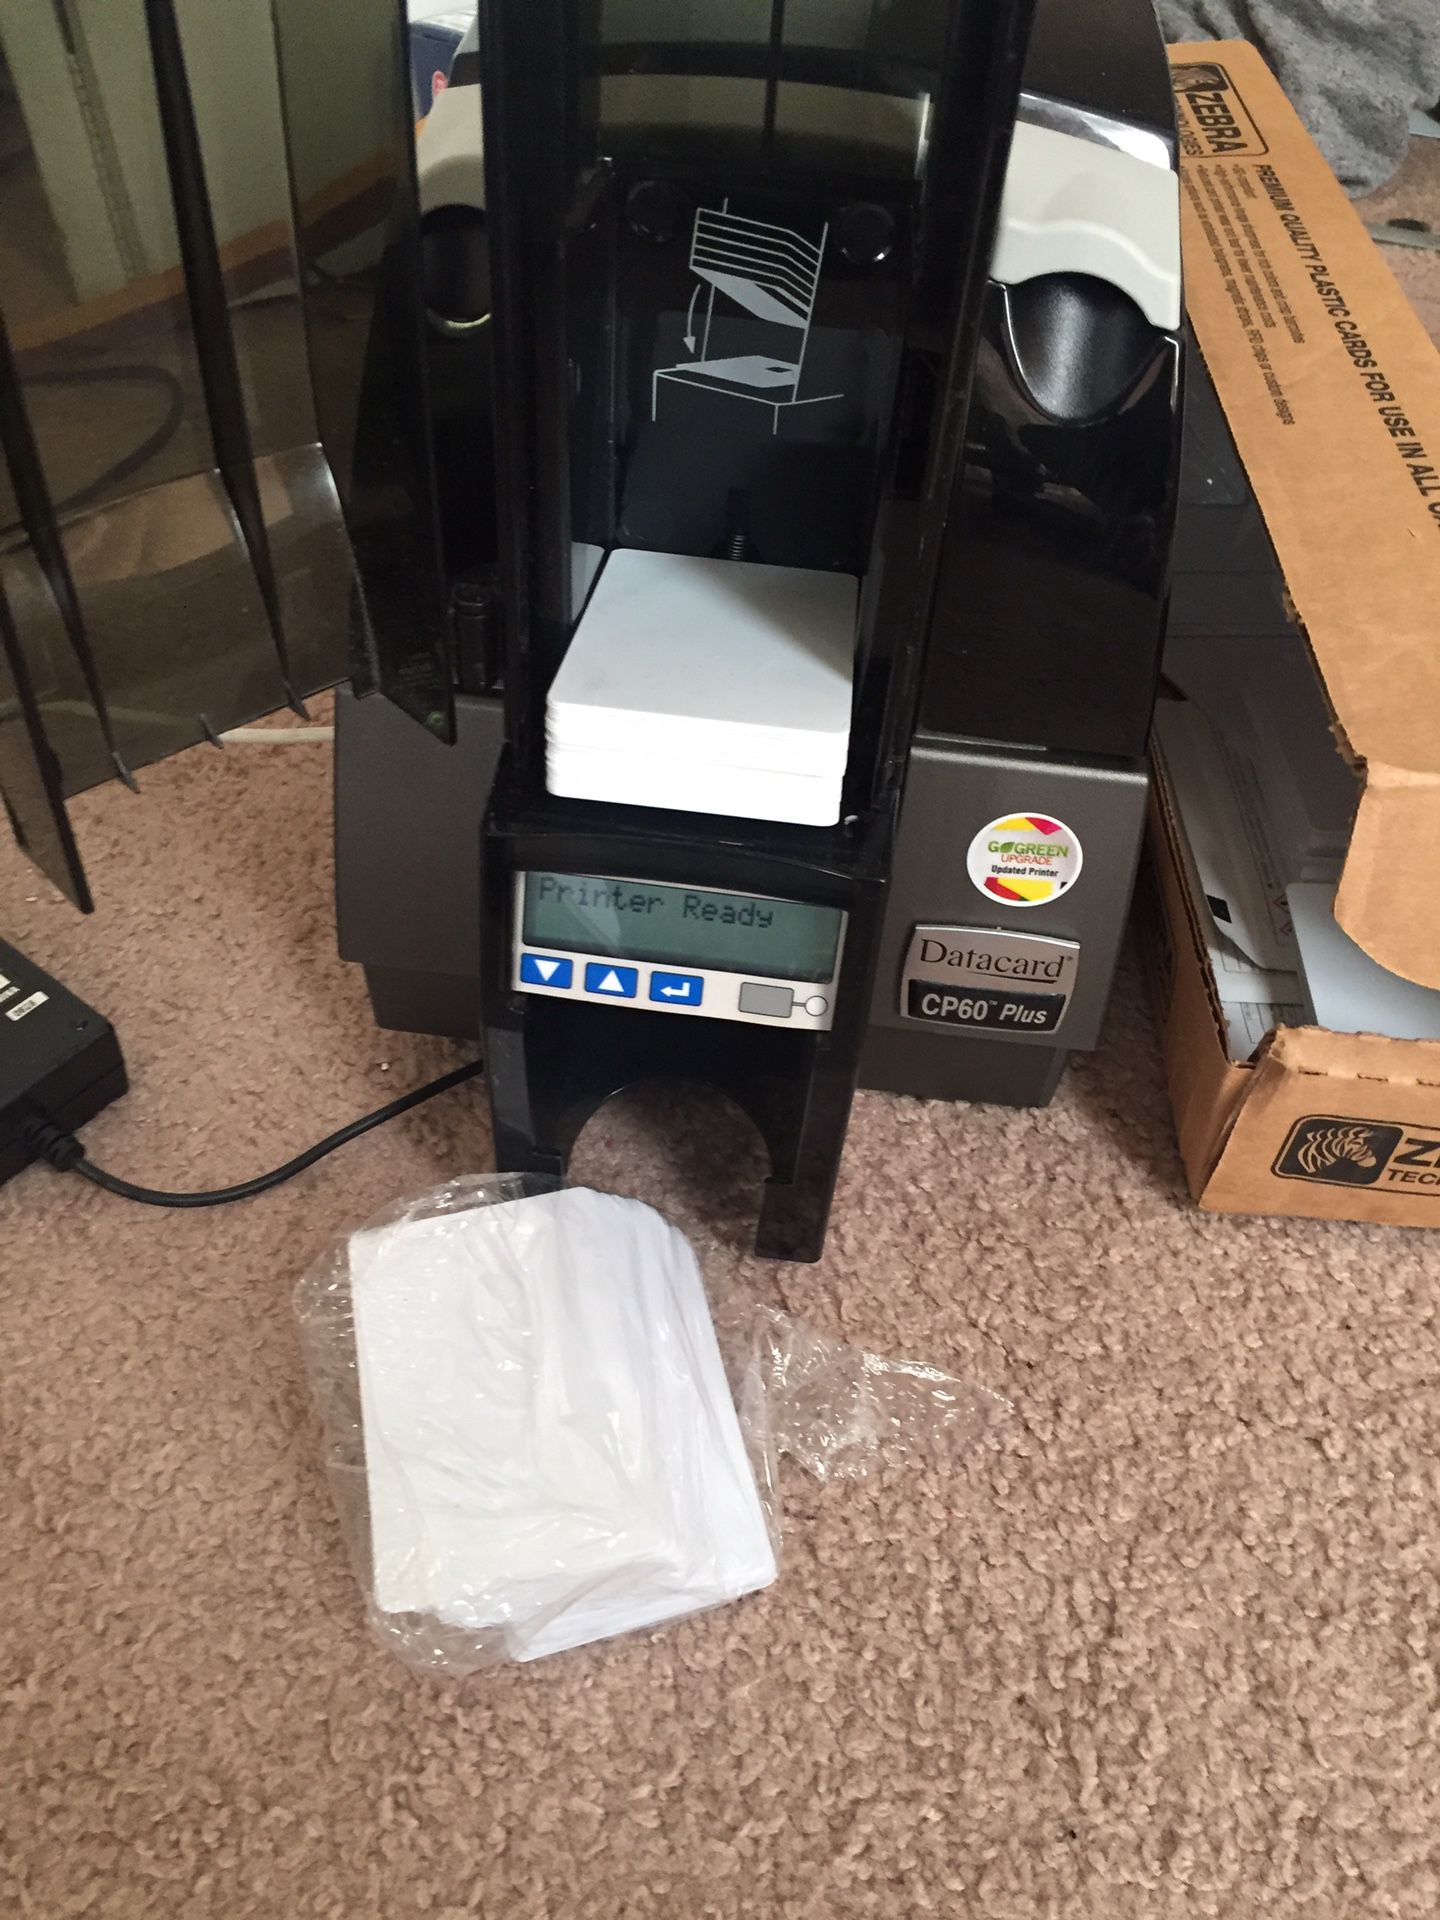 Data card ID CARD PRINTER FULLY FUNCTIONAL 275 free blank cards